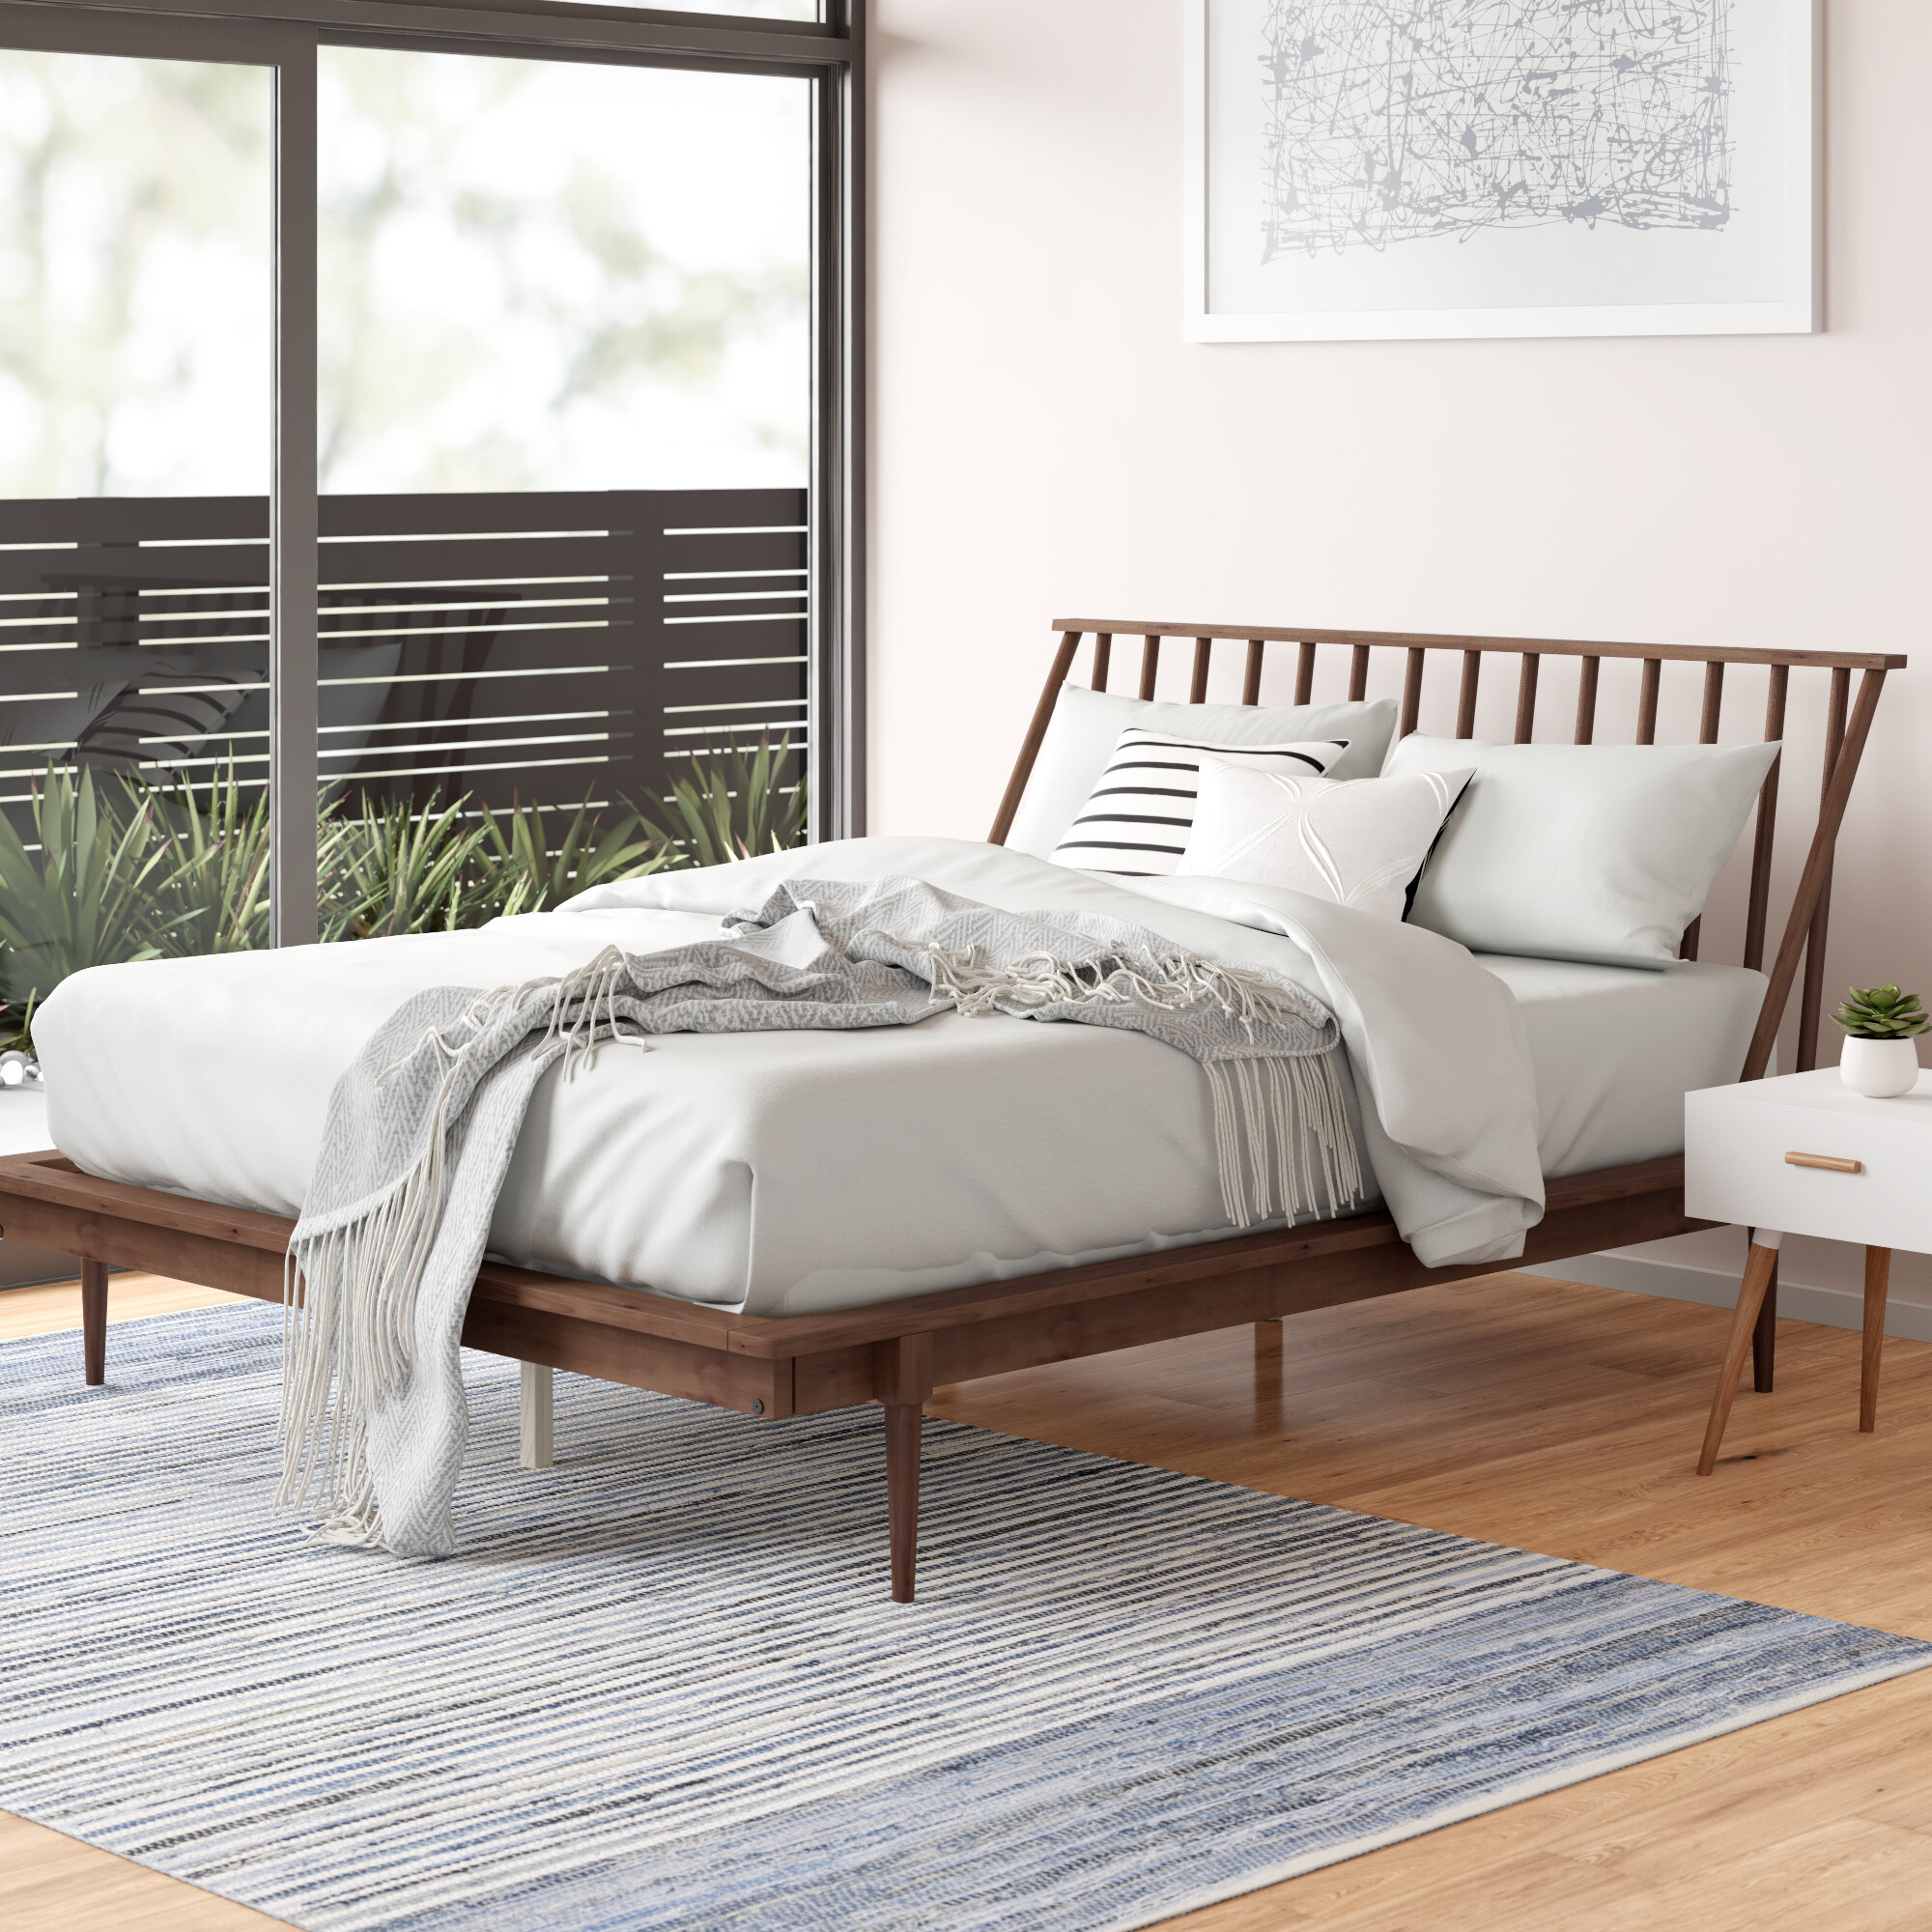 Featured image of post Wood Queen Platform Bed Frame With Headboard / 4.6 out of 5 stars, based on 32 reviews 32 ratings current price $187.00 $ 187.